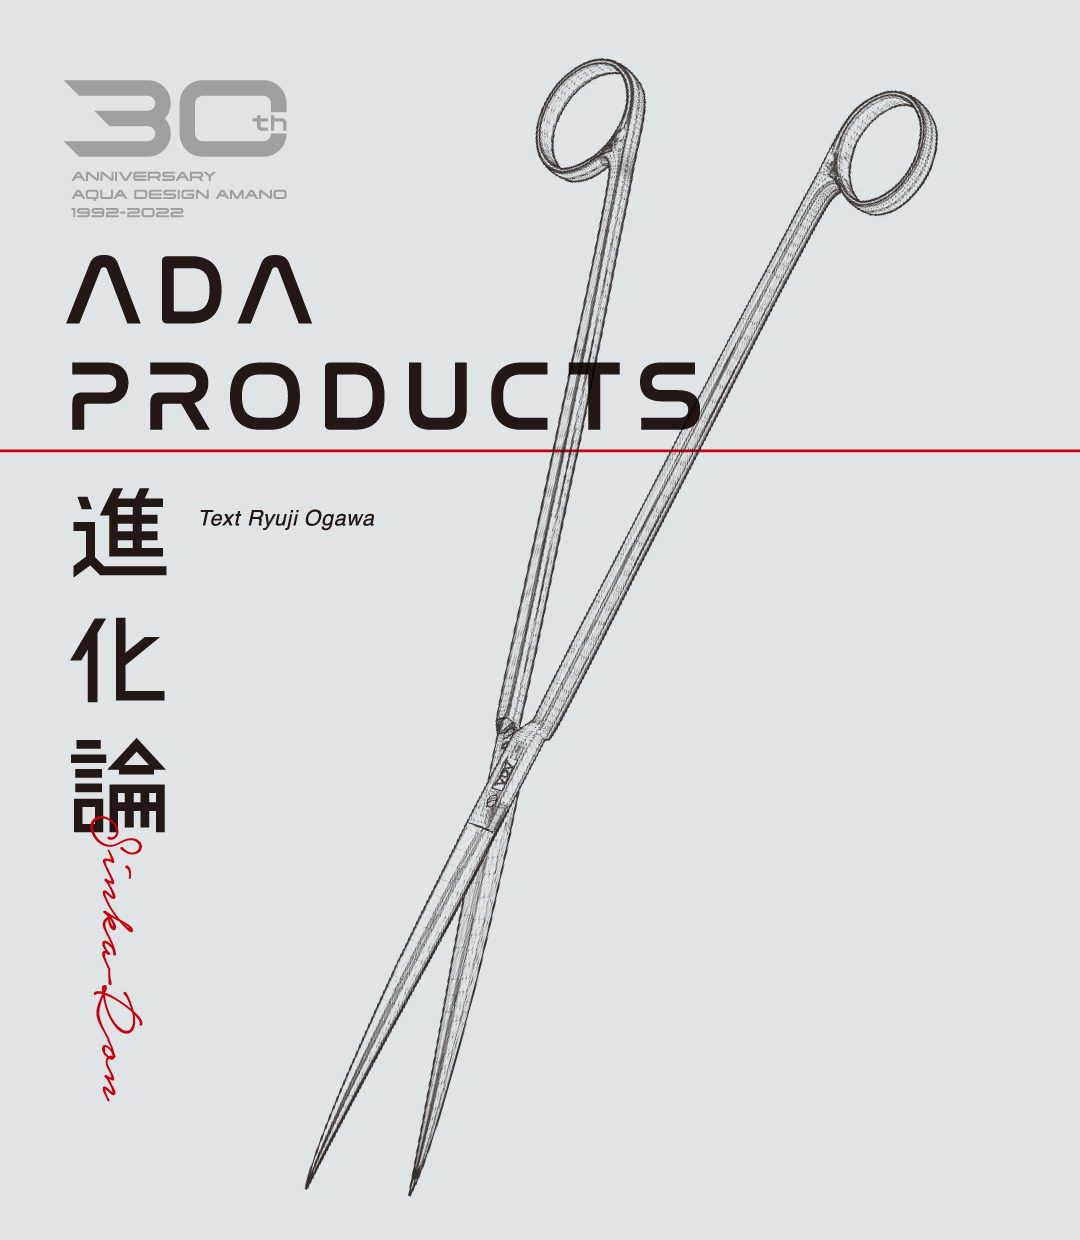 ADA PRODUCTS 進化論 「シザース・シリーズ」